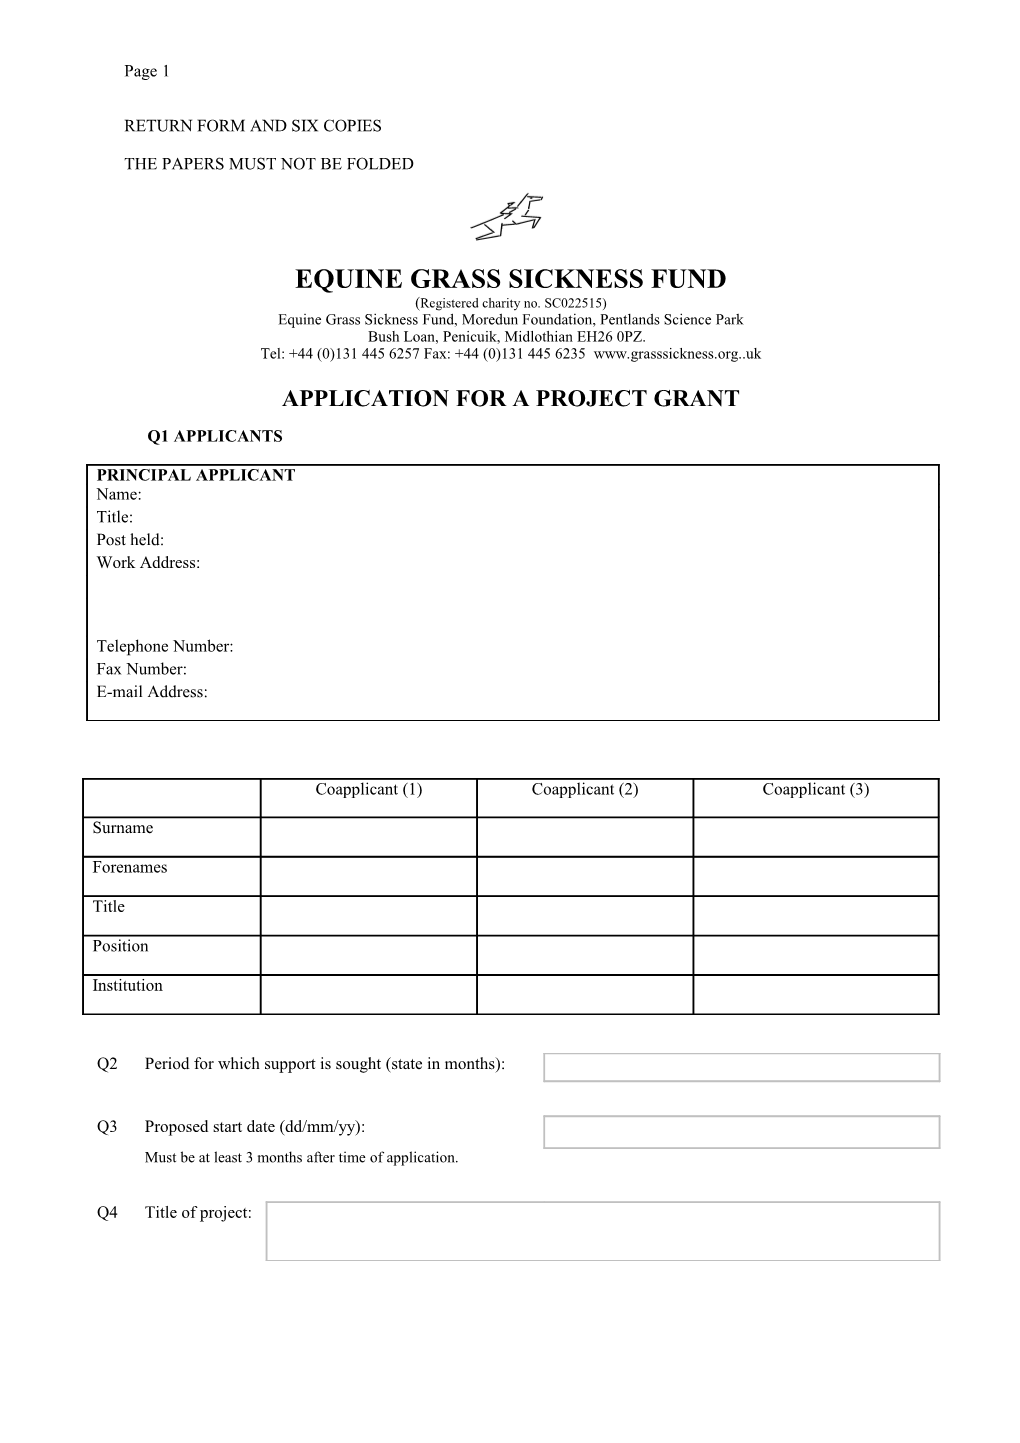 Return Form and Six Copies